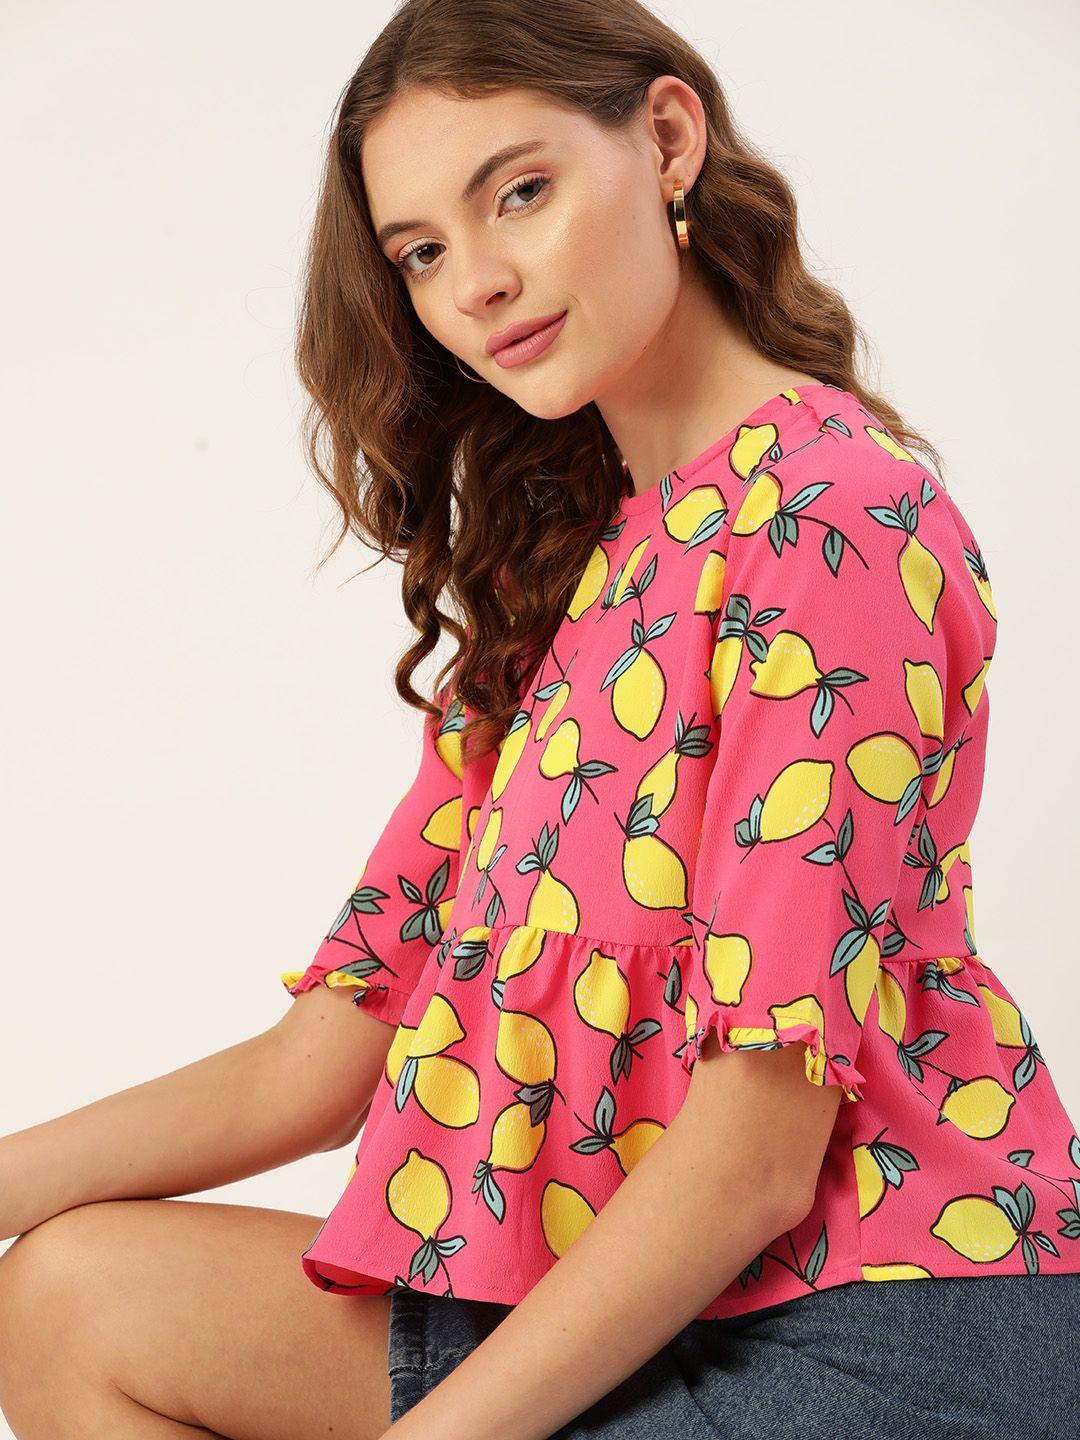 dressberry pink & yellow print top